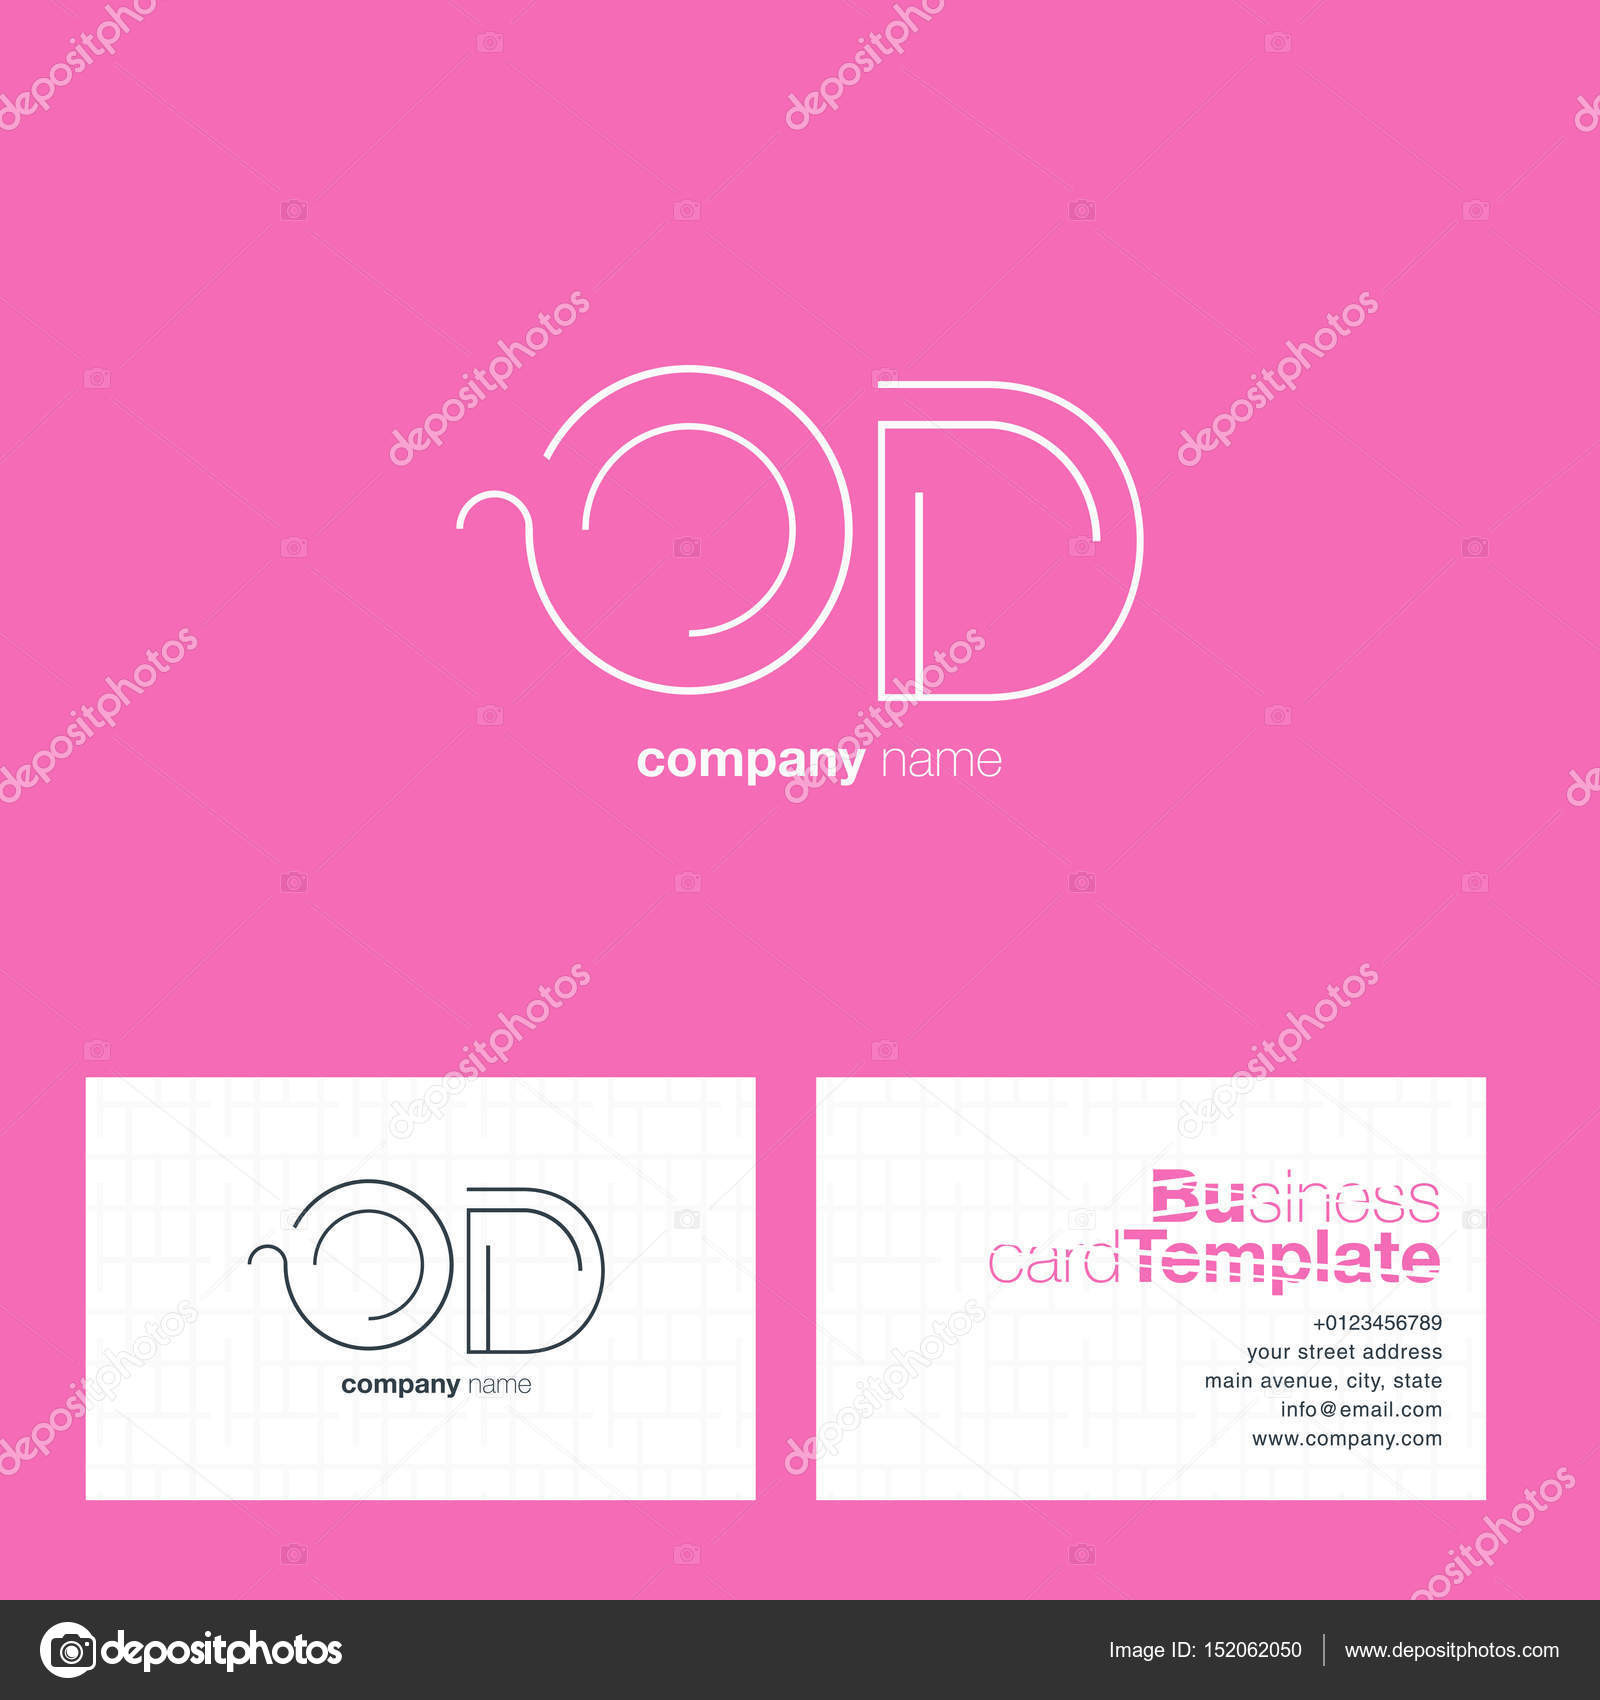 pink business card template luxury design circle business card template od letters logo business card stock